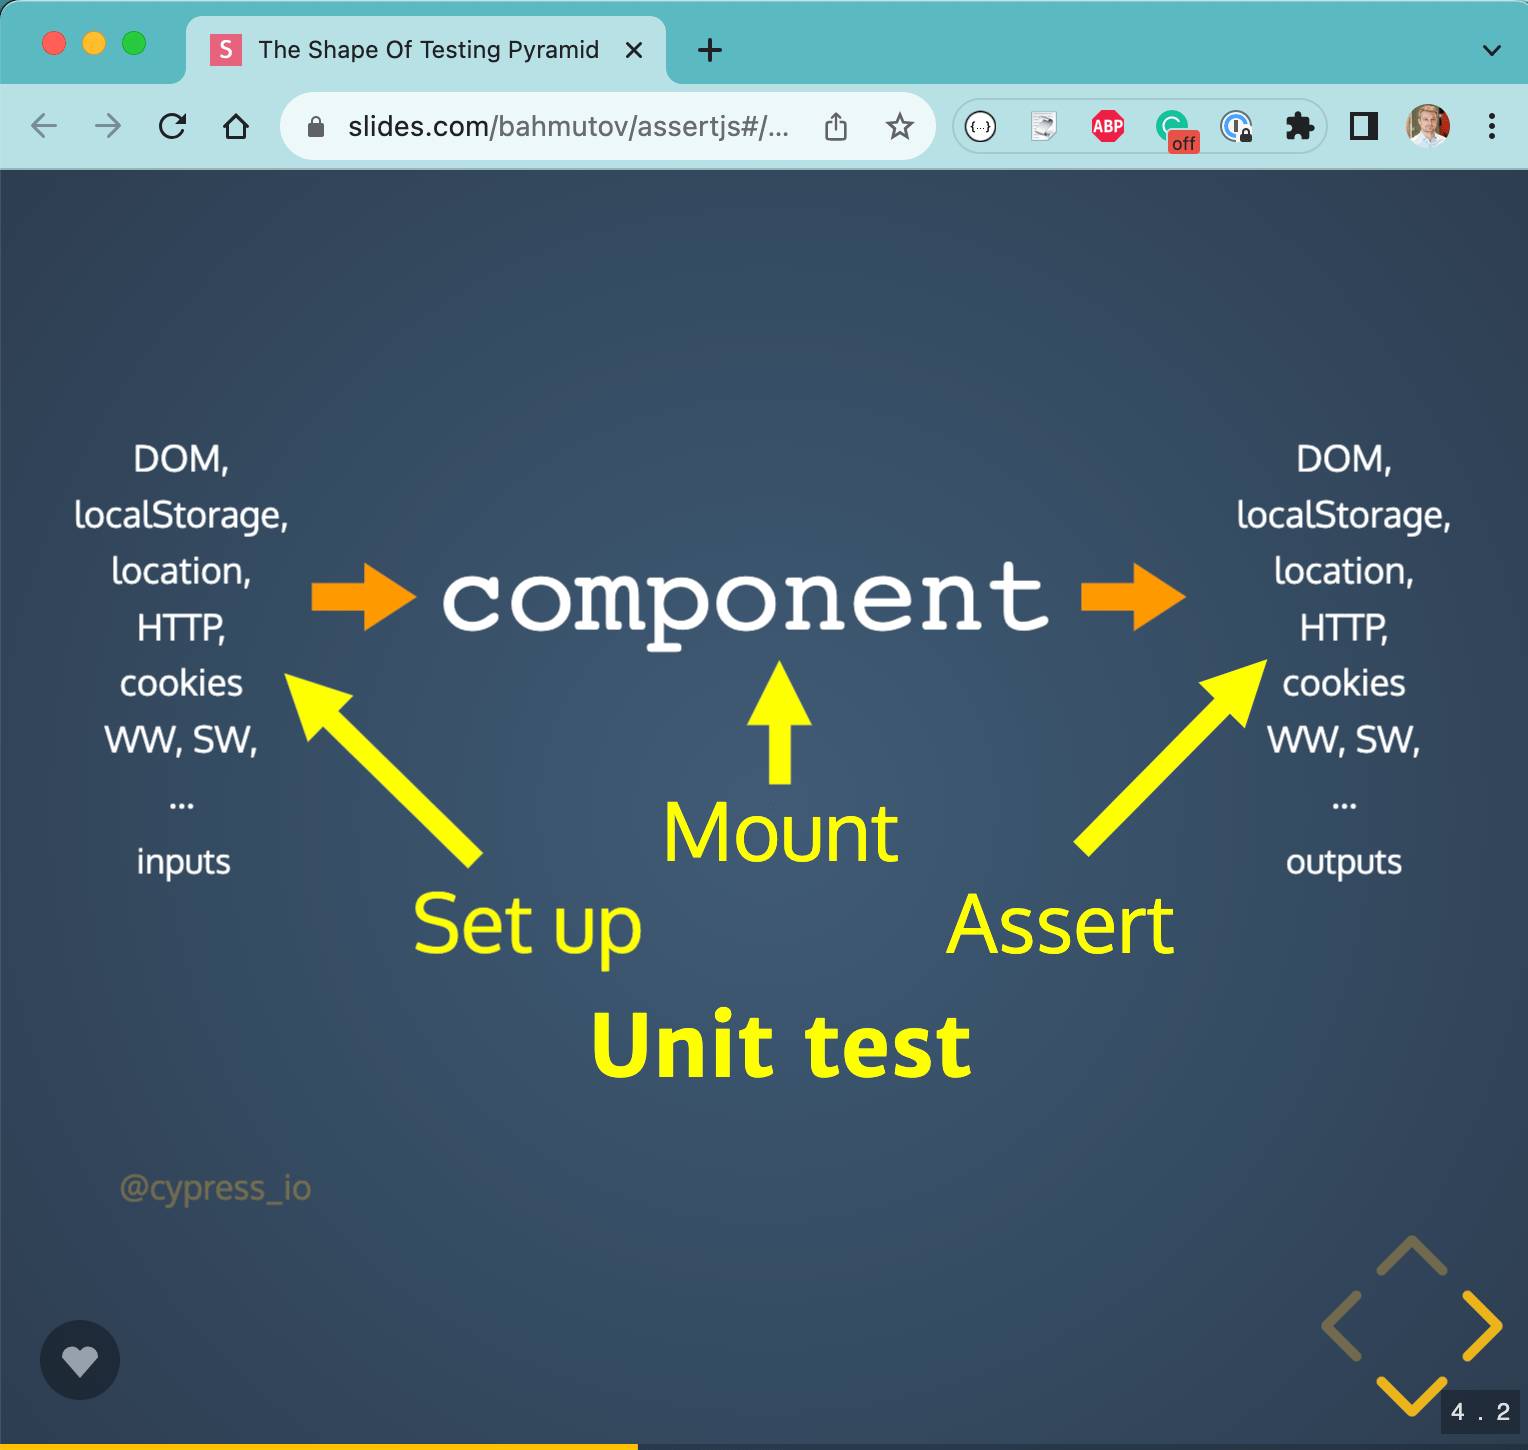 How I see component tests